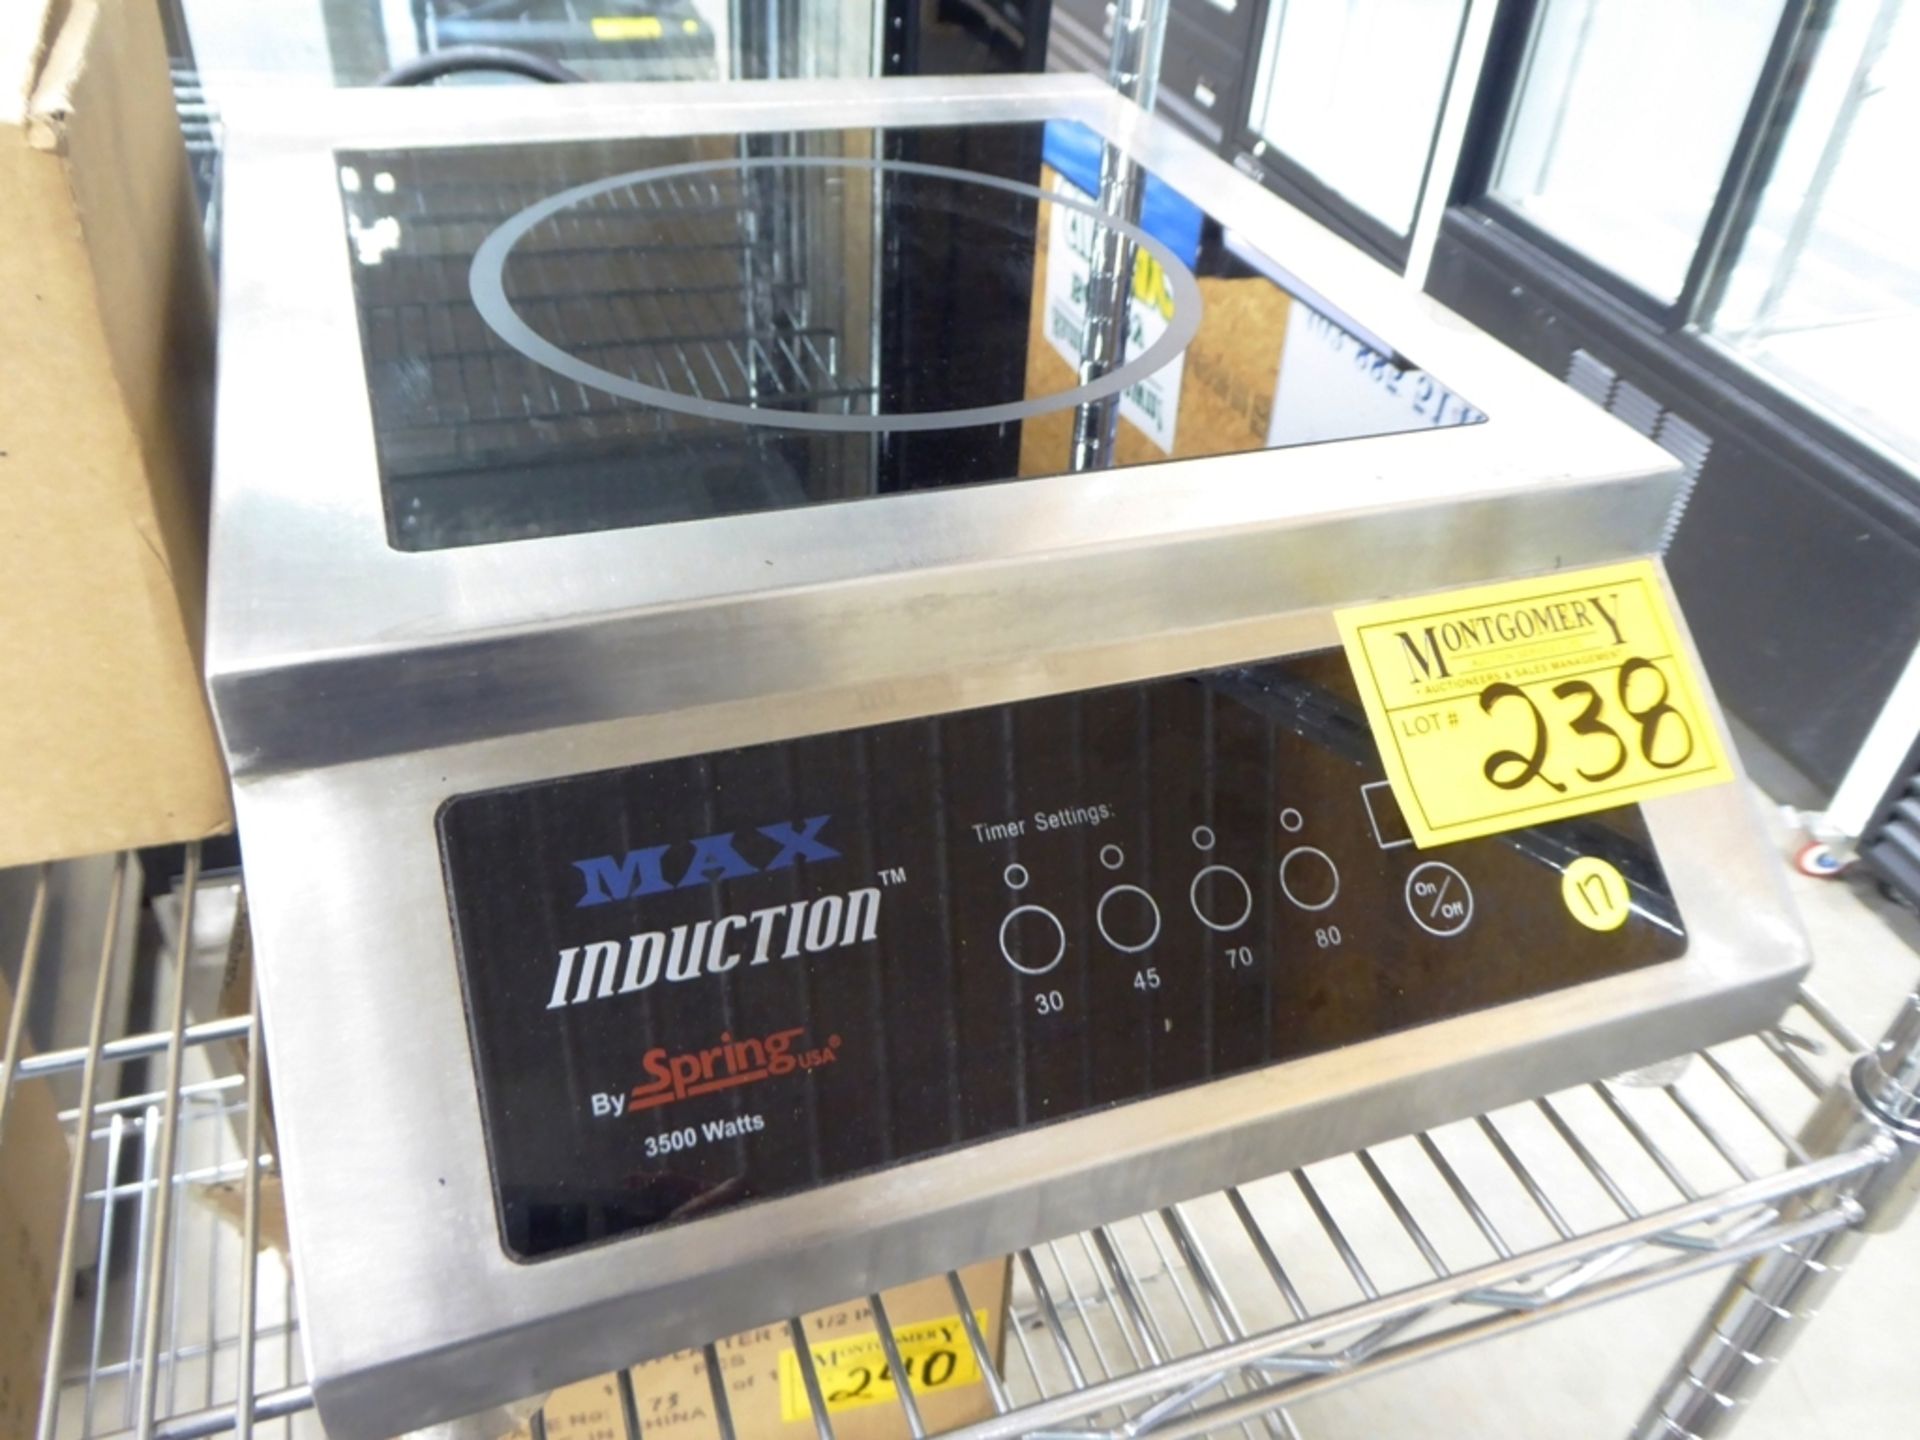 SPRING MAX COUNTER TOP INDUCTION HEATER - 3500W